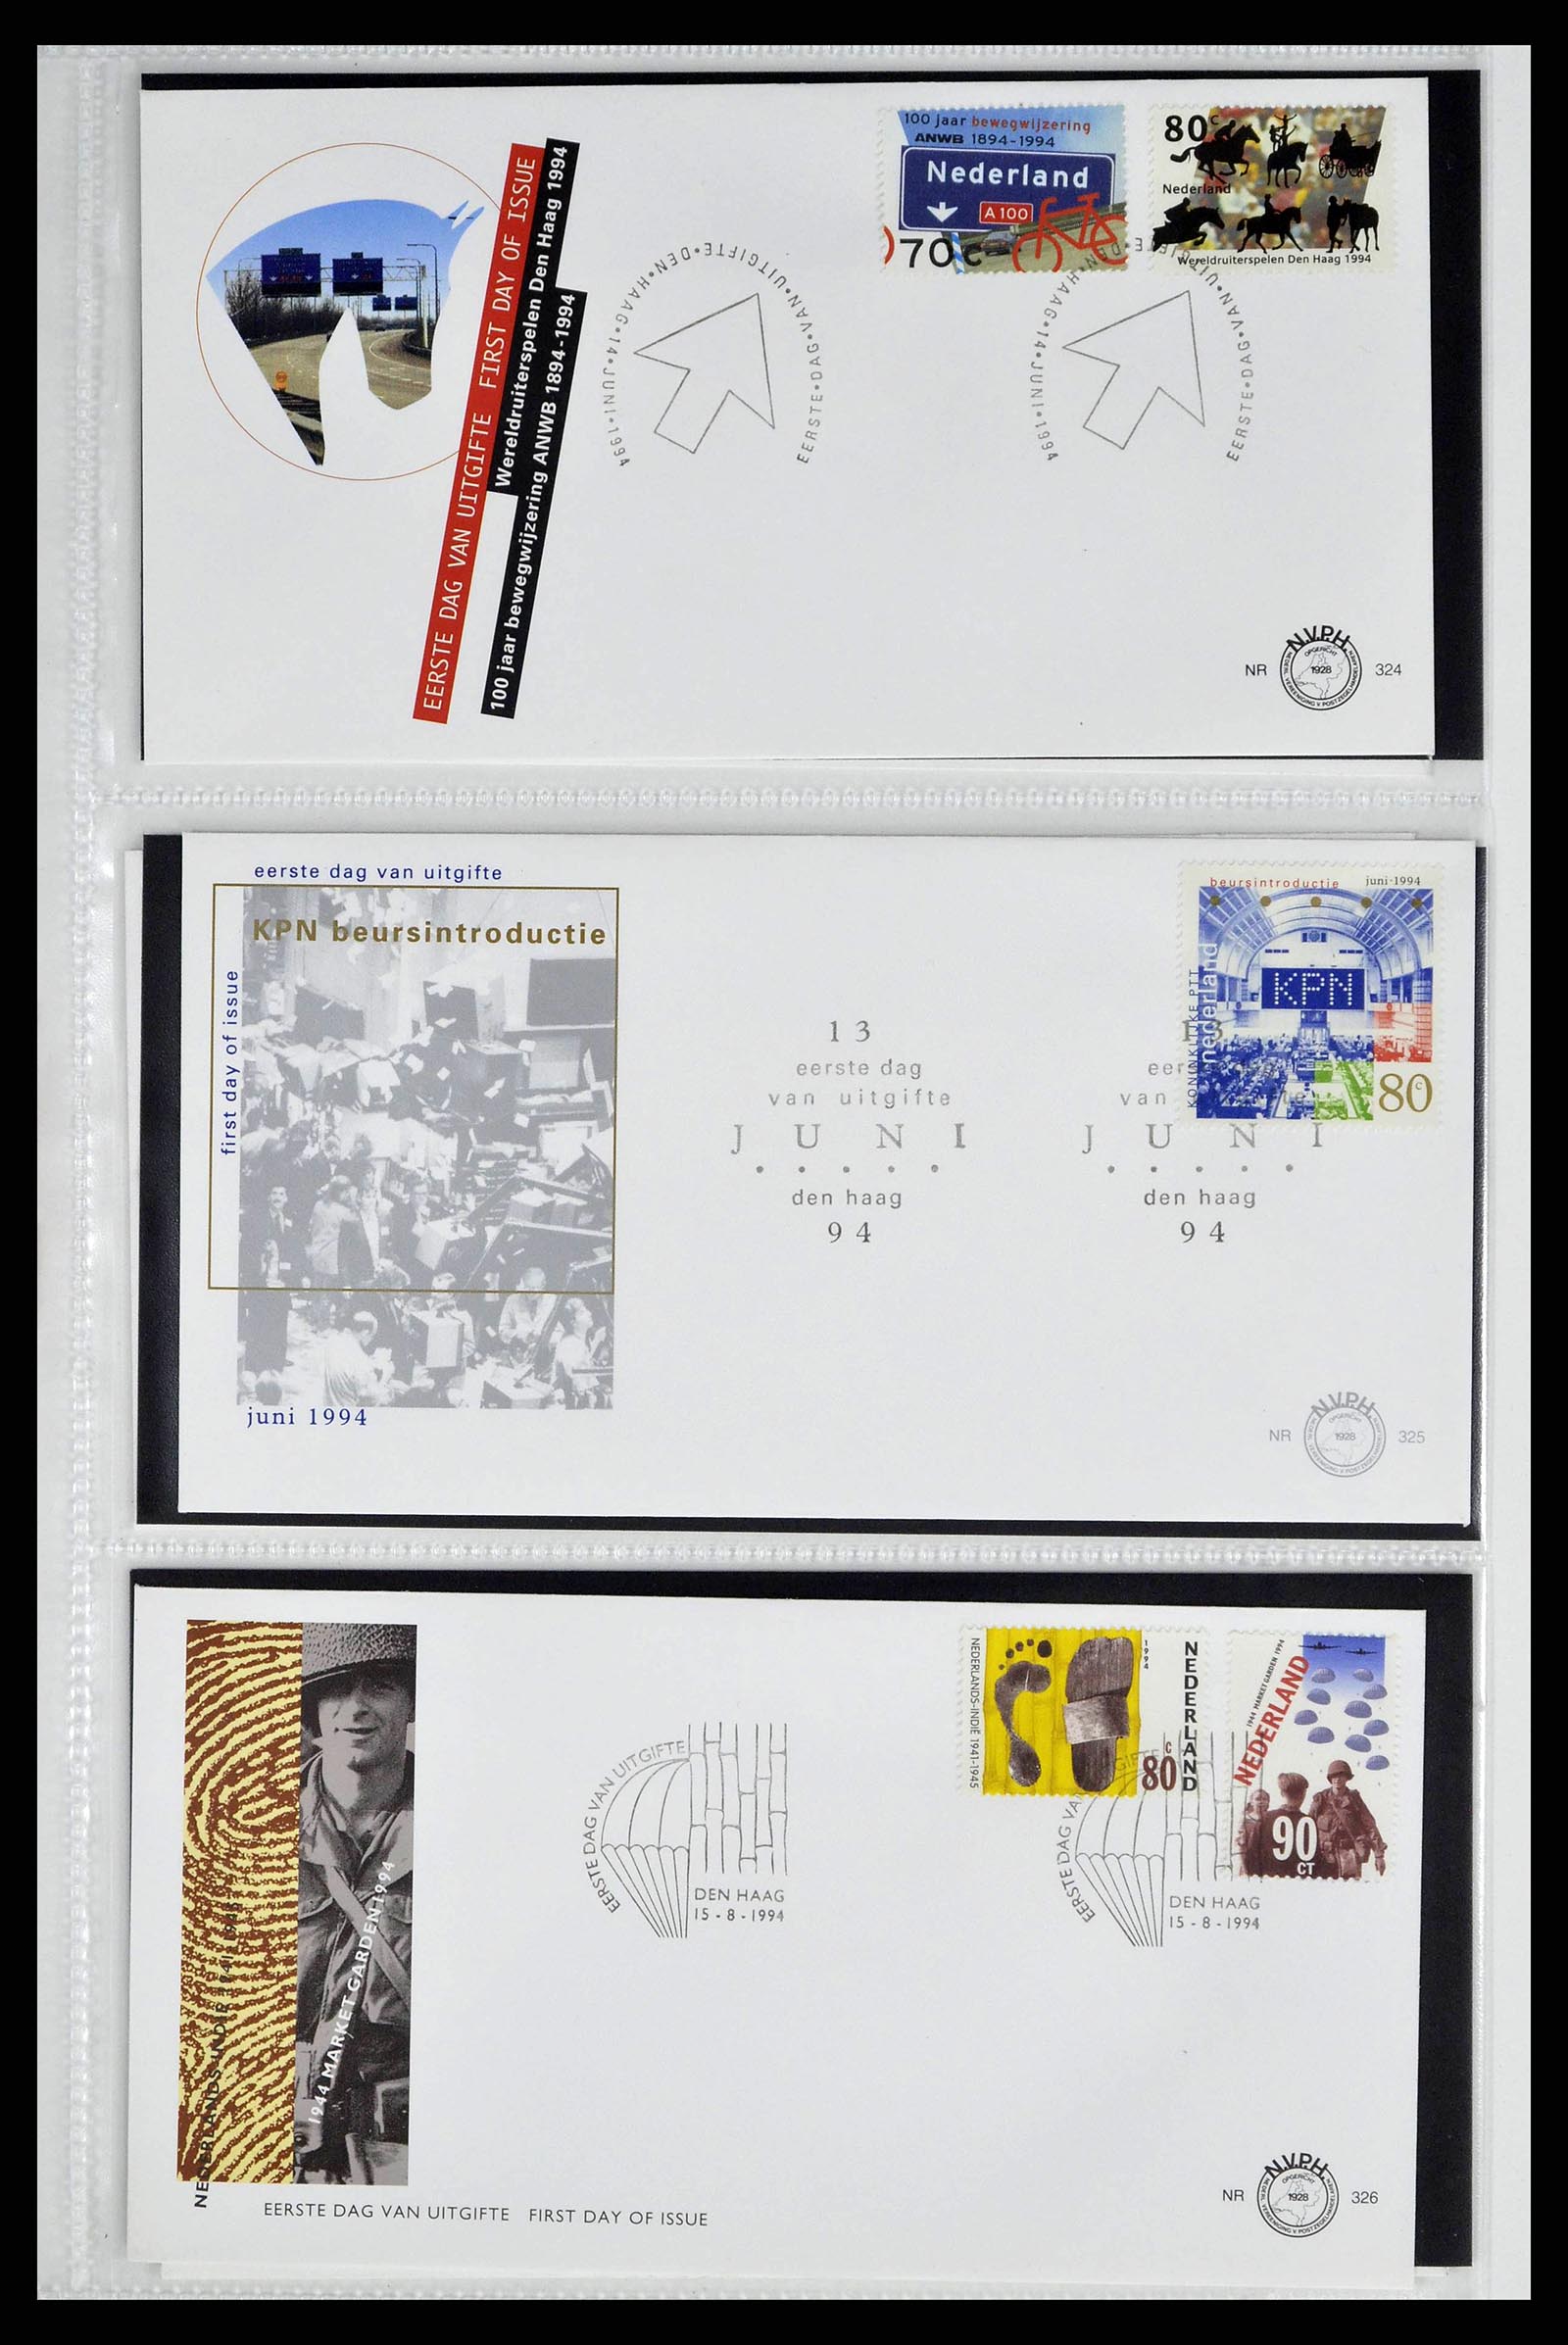 38517 0173 - Stamp collection 38517 Netherlands FDC's 1981-2011.